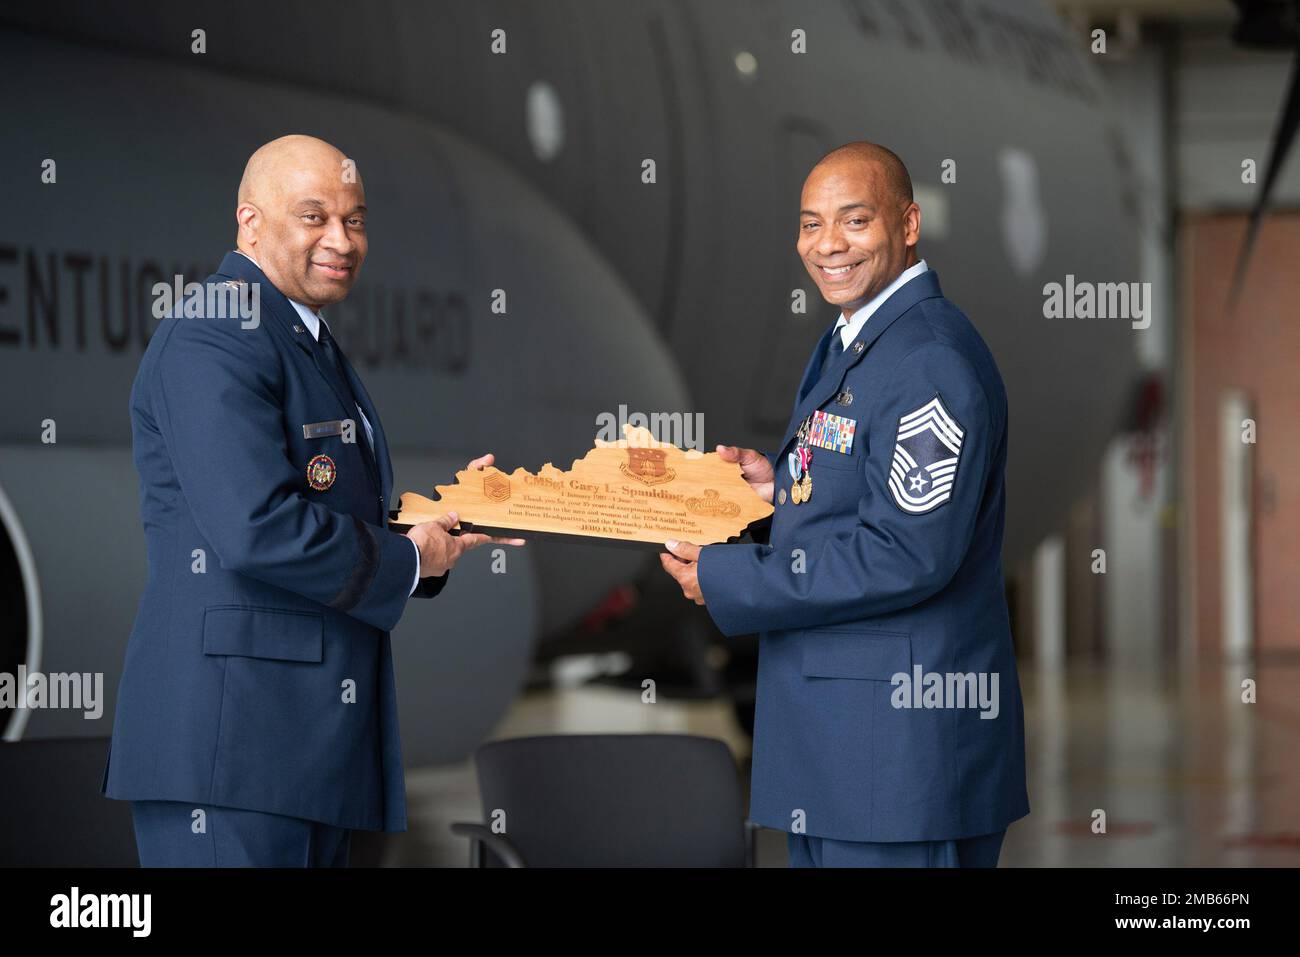 Chief Master Sgt. Gary L. Spaulding, right, military personnel management officer for the Kentucky Air National Guard, receives a plaque from  Maj. Gen. Charles M. Walker, director of the Office of Complex Investigations at the National Guard Bureau, during Spaulding’s retirement ceremony at the Kentucky Air National Guard Base in Louisville, Ky., June 12, 2022. Spaulding served 35 in the Kentucky Air Guard. Stock Photo